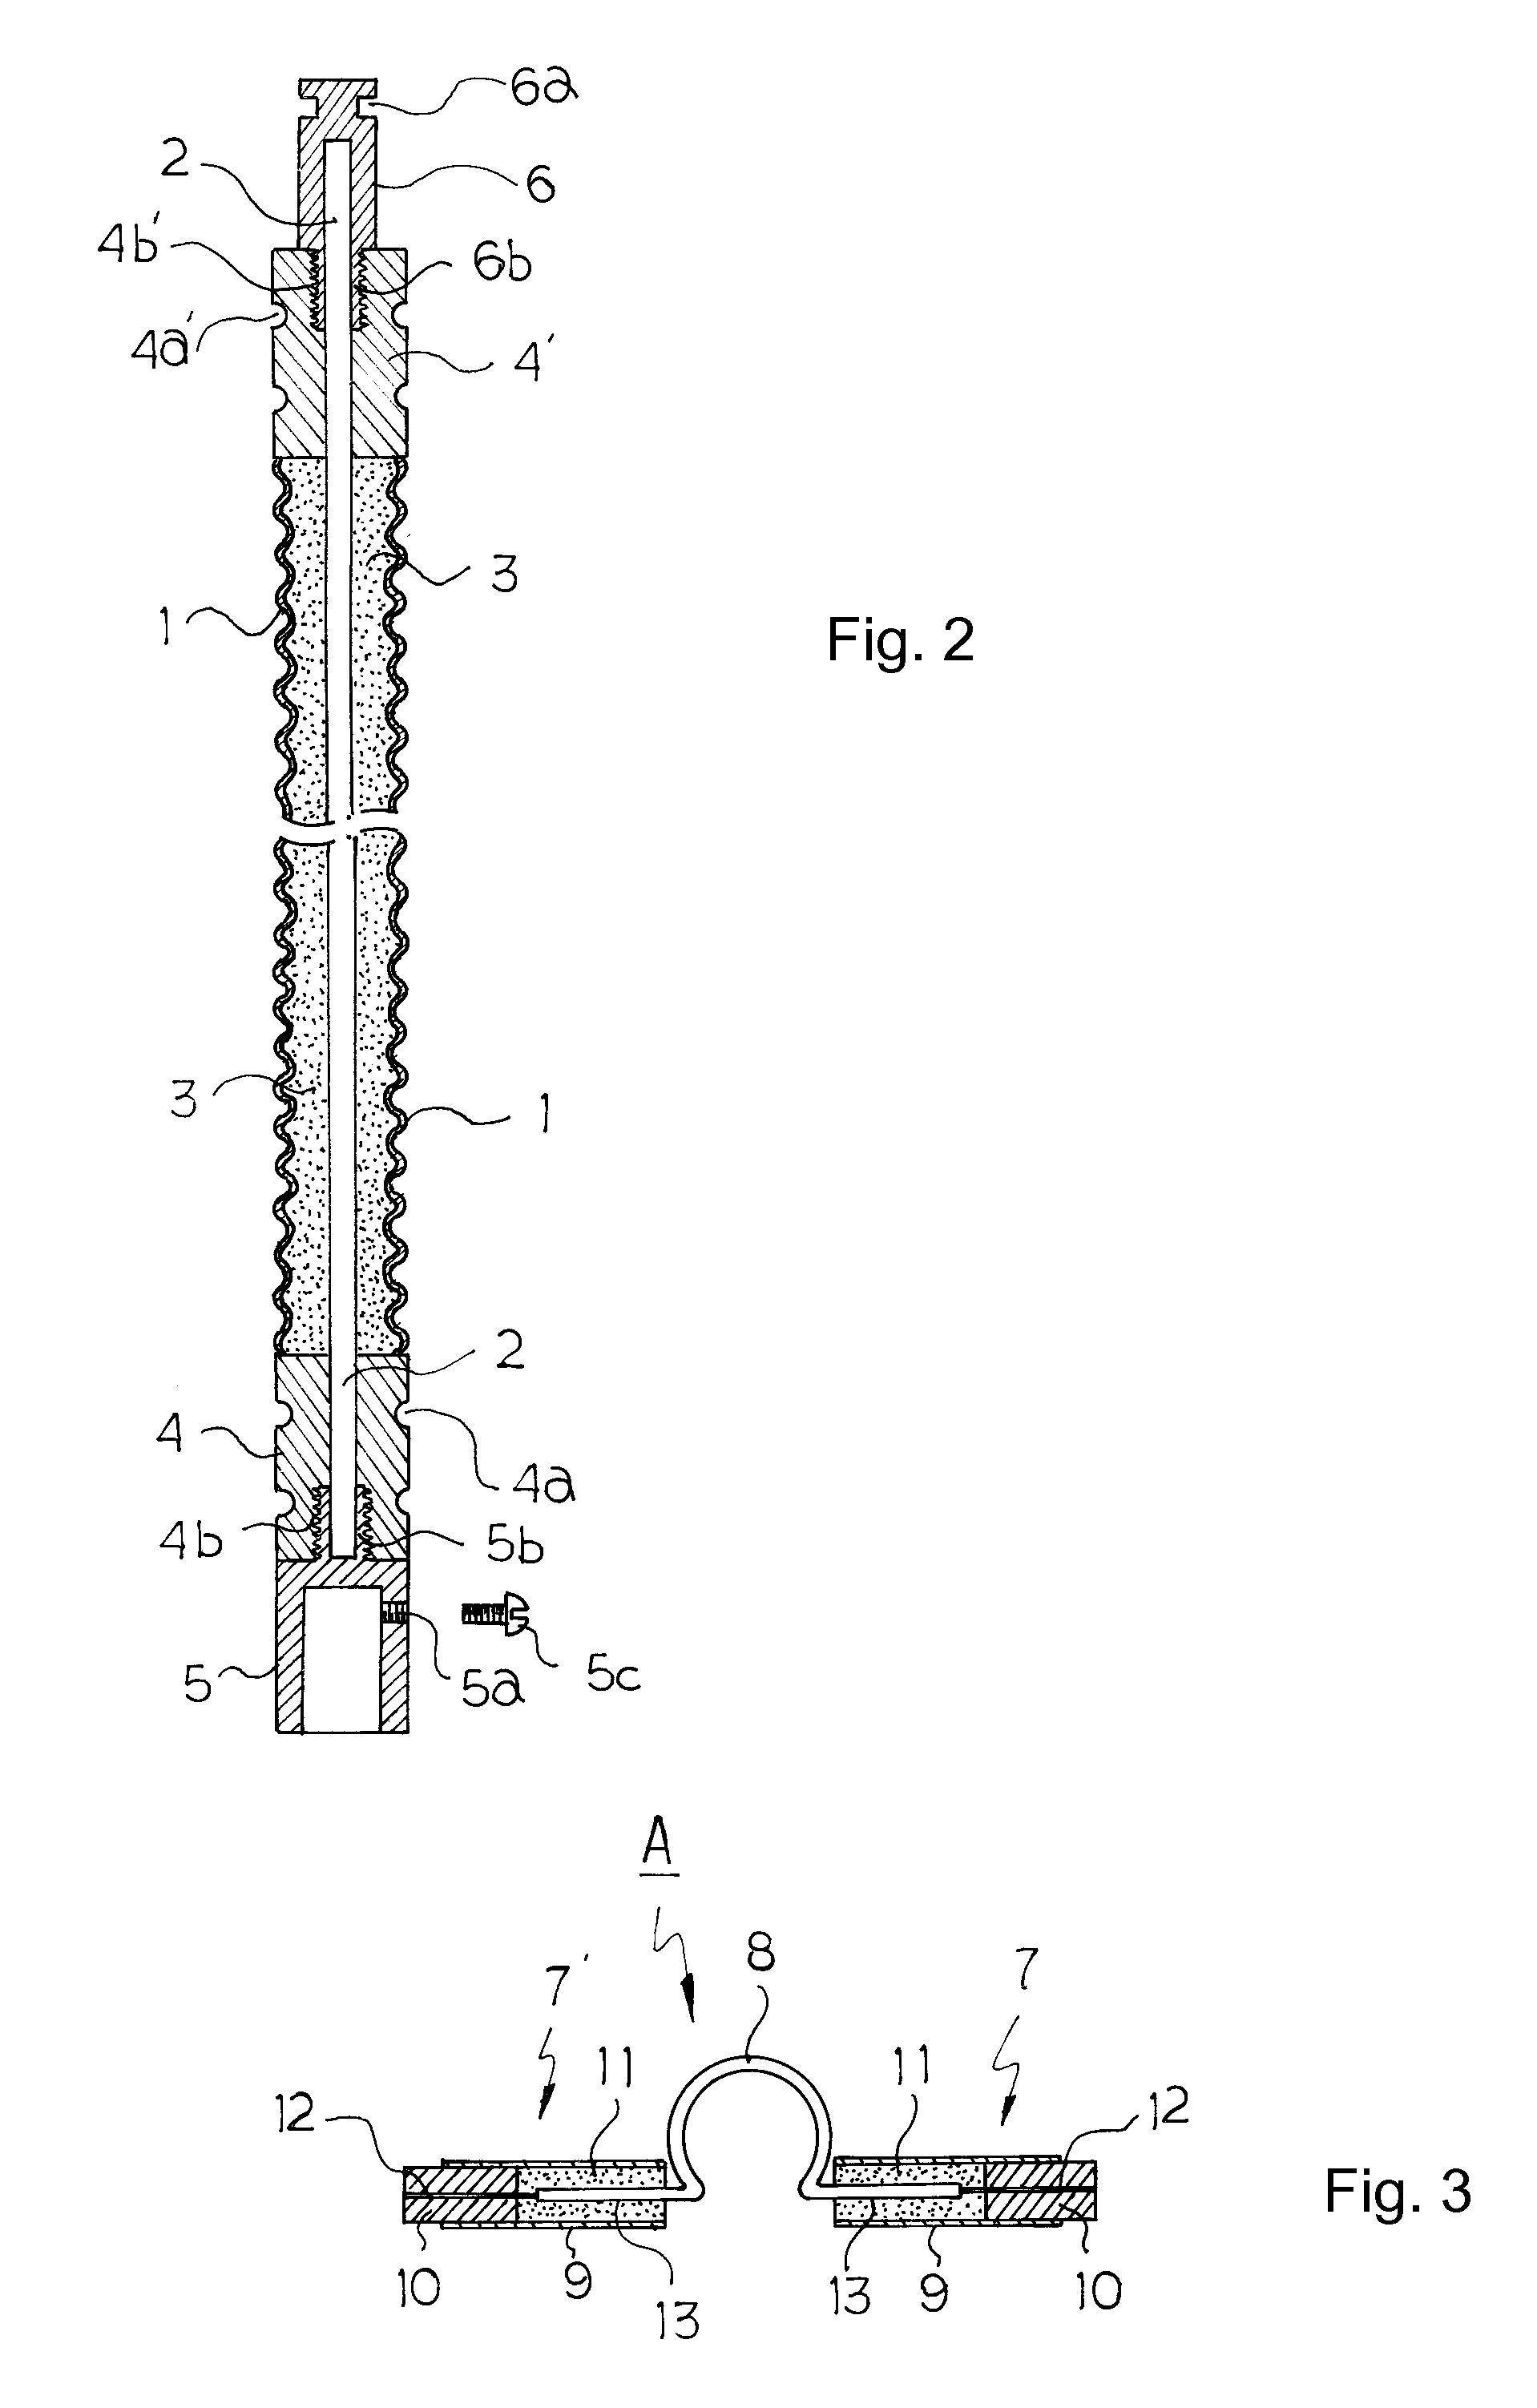 Grounding Wire Structure Having Stainless Steel Covering and Method of Manufacturing the Same